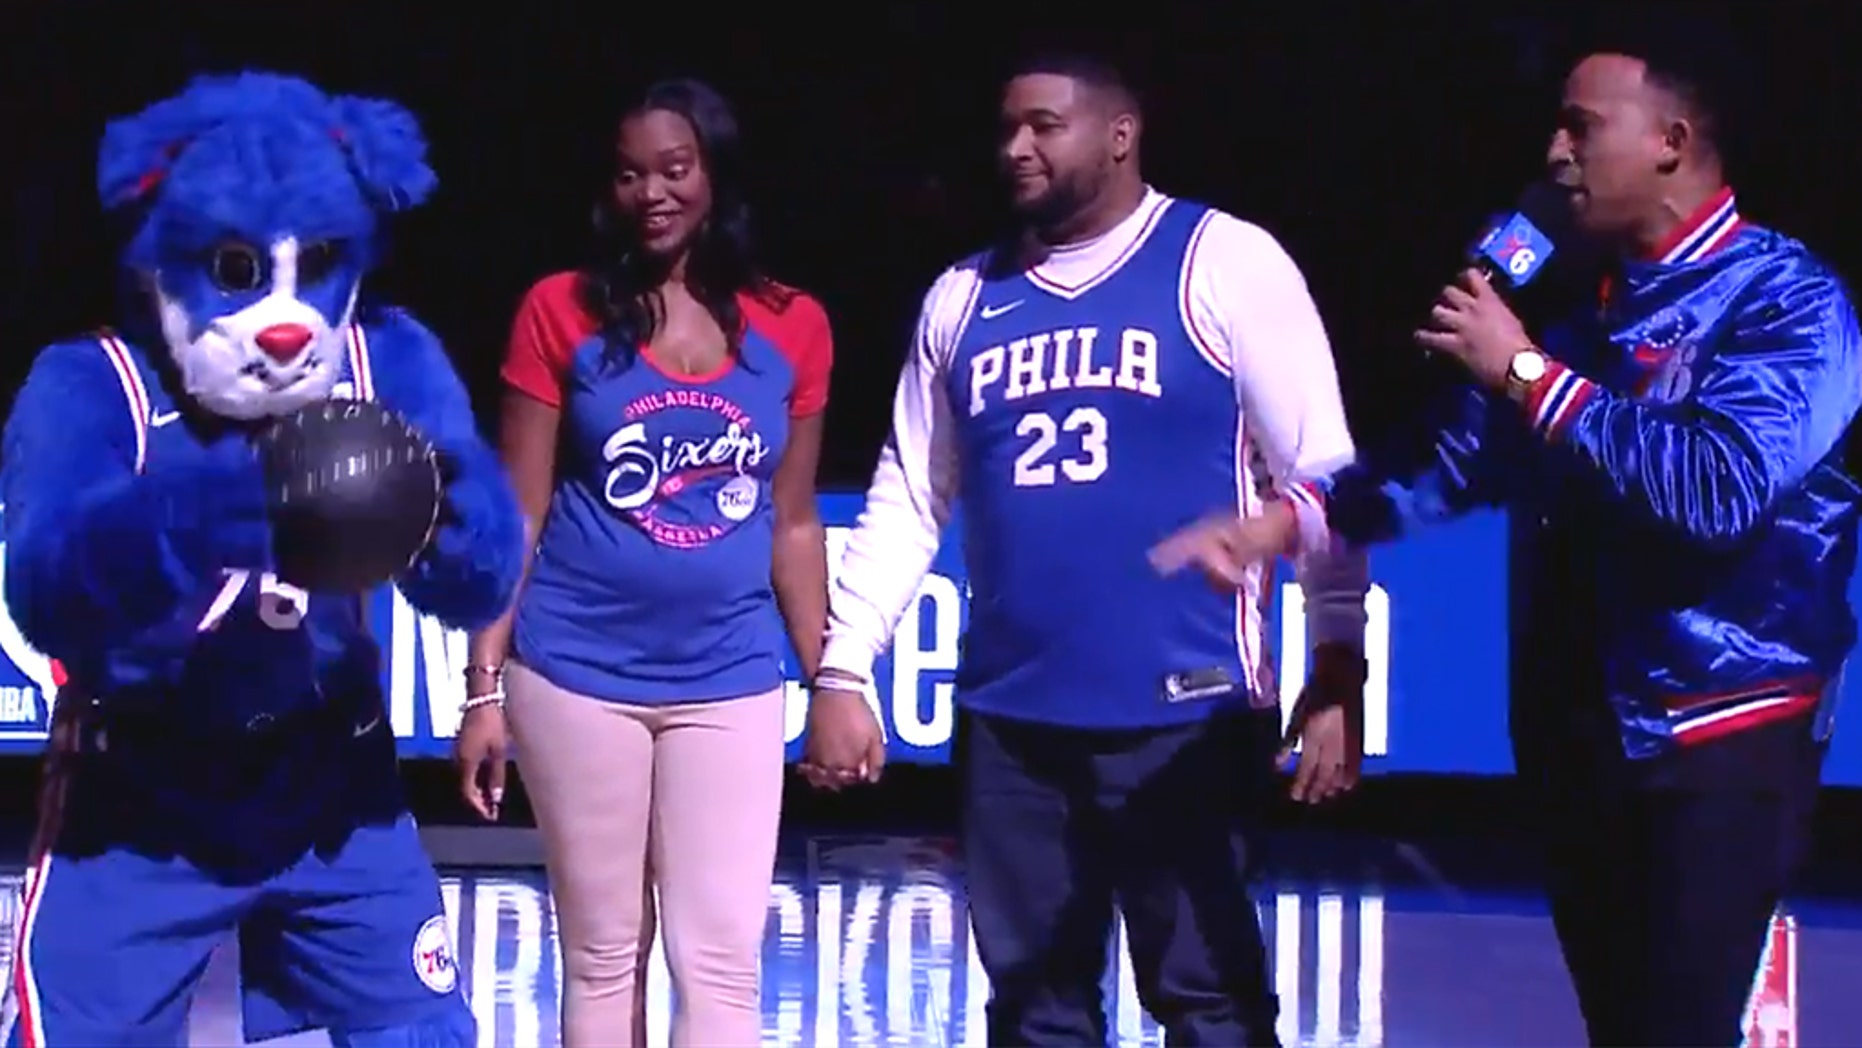 Couple learns baby’s gender during reveal with Philadelphia 76ers mascot